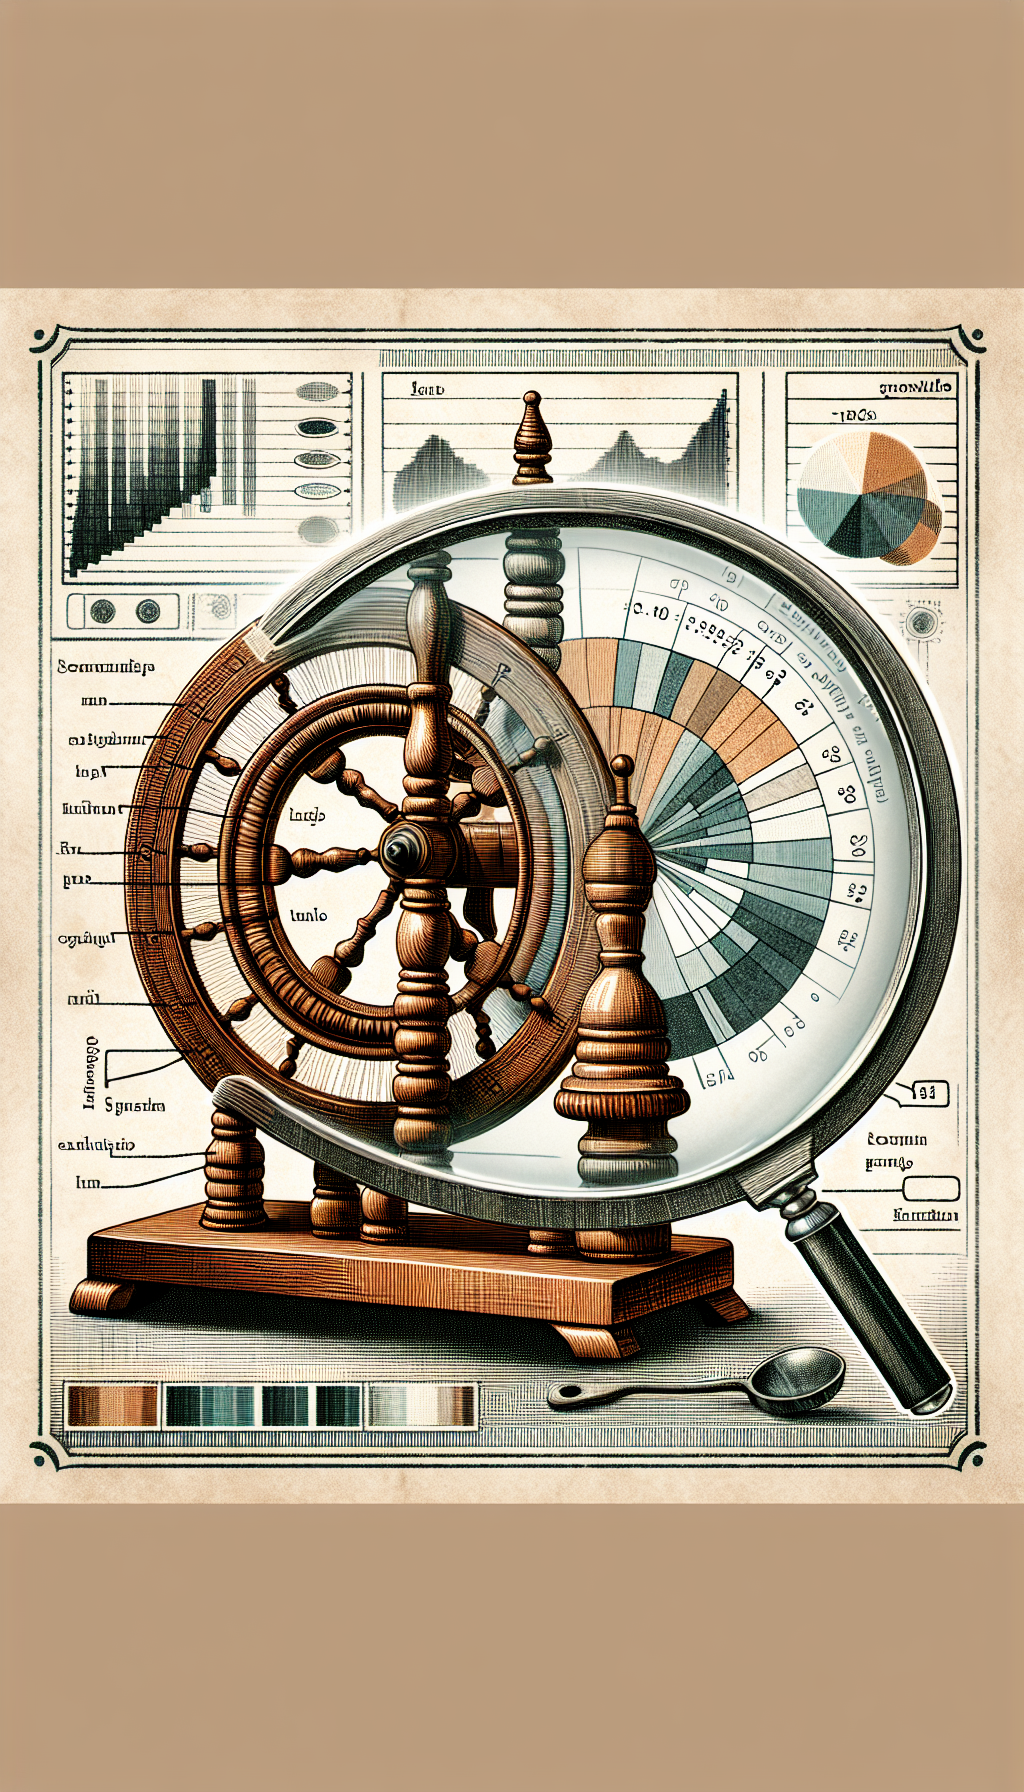 An illustration depicts a partially translucent antique spinning wheel, with its anatomy labeled - showcasing various wood grains and textures within its structure. Accompanying it, a magnifying glass hovers over distinct joints and carvings, highlighting the intricate craftsmanship. In the background, a faded price tag with a rising graph symbolizes the spinning wheel's value, merging the old with its worth in a vintage, etched art style.